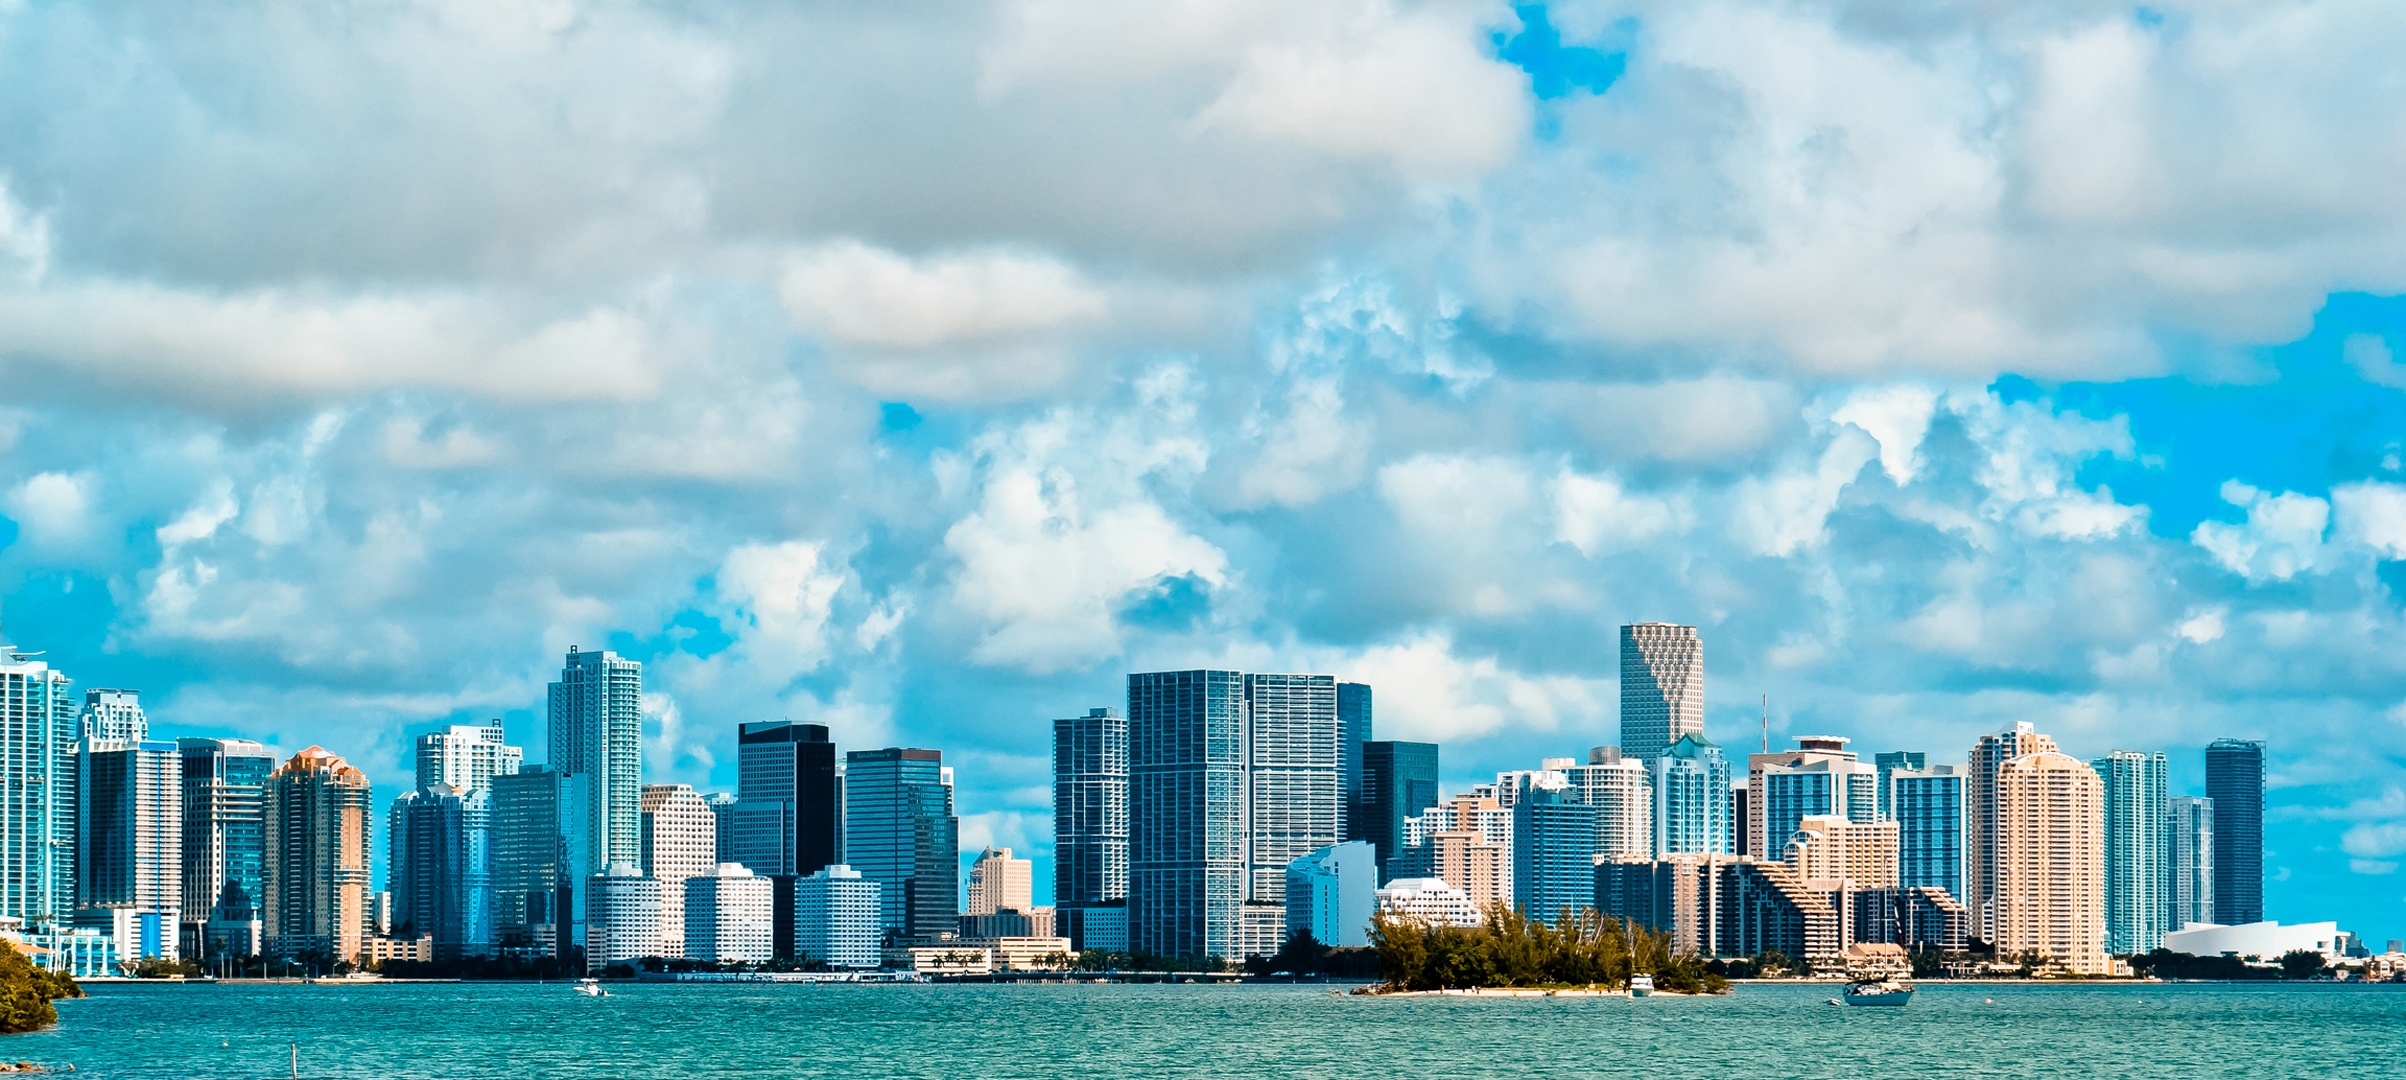 miami, building, high rise buildings, cities, sky, clouds, usa, united states, america, florida, miami beach